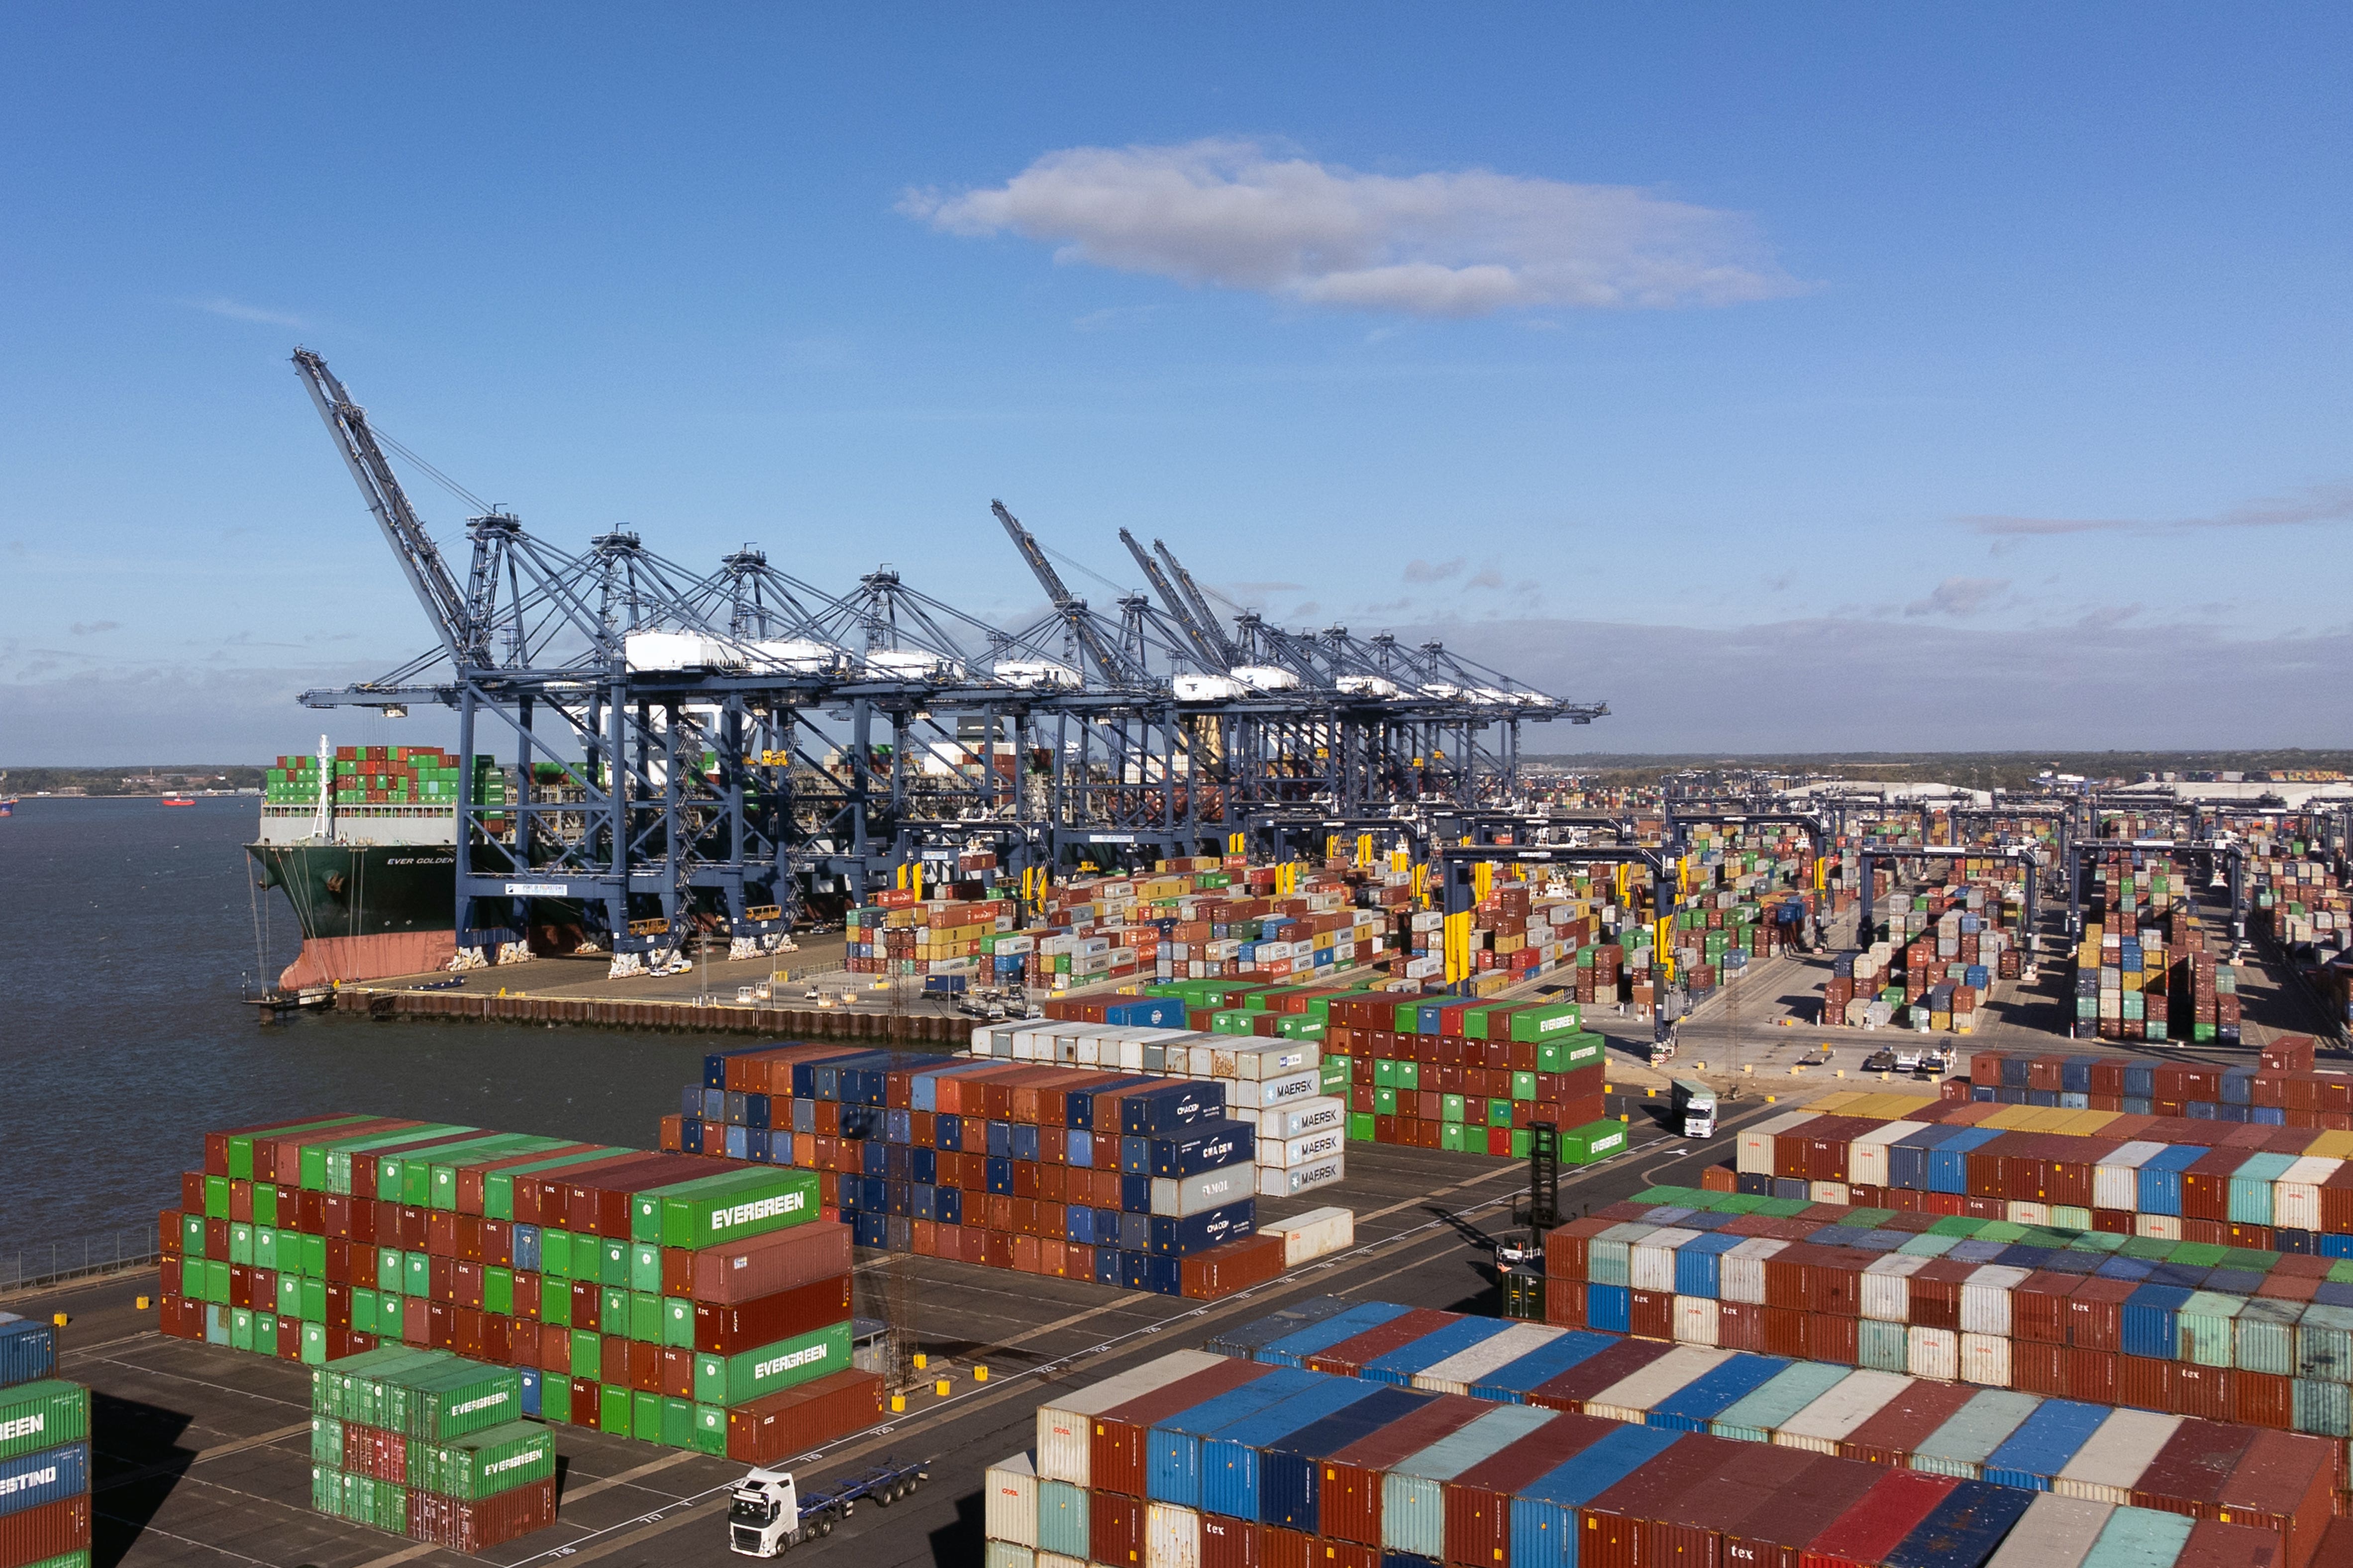 Containers are unloaded from cargo ships at the Port of Felixstowe (Joe Giddens/PA)